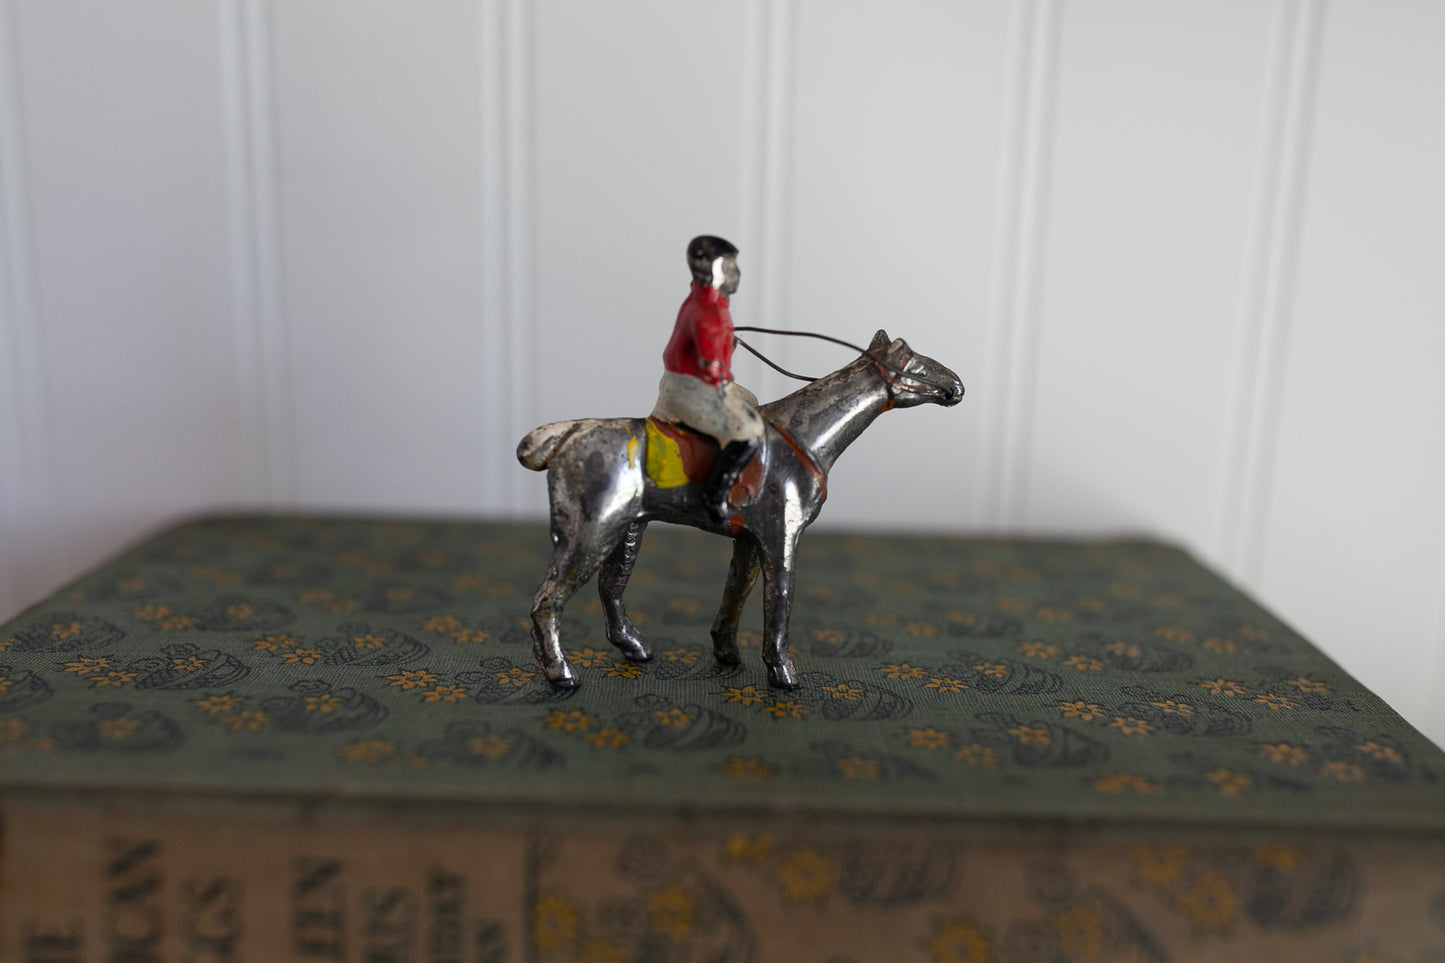 Vintage Japan Cast Iron Lead Silver Painted Horse &Jockey Childs Play Toy Figure - 2.25" tall